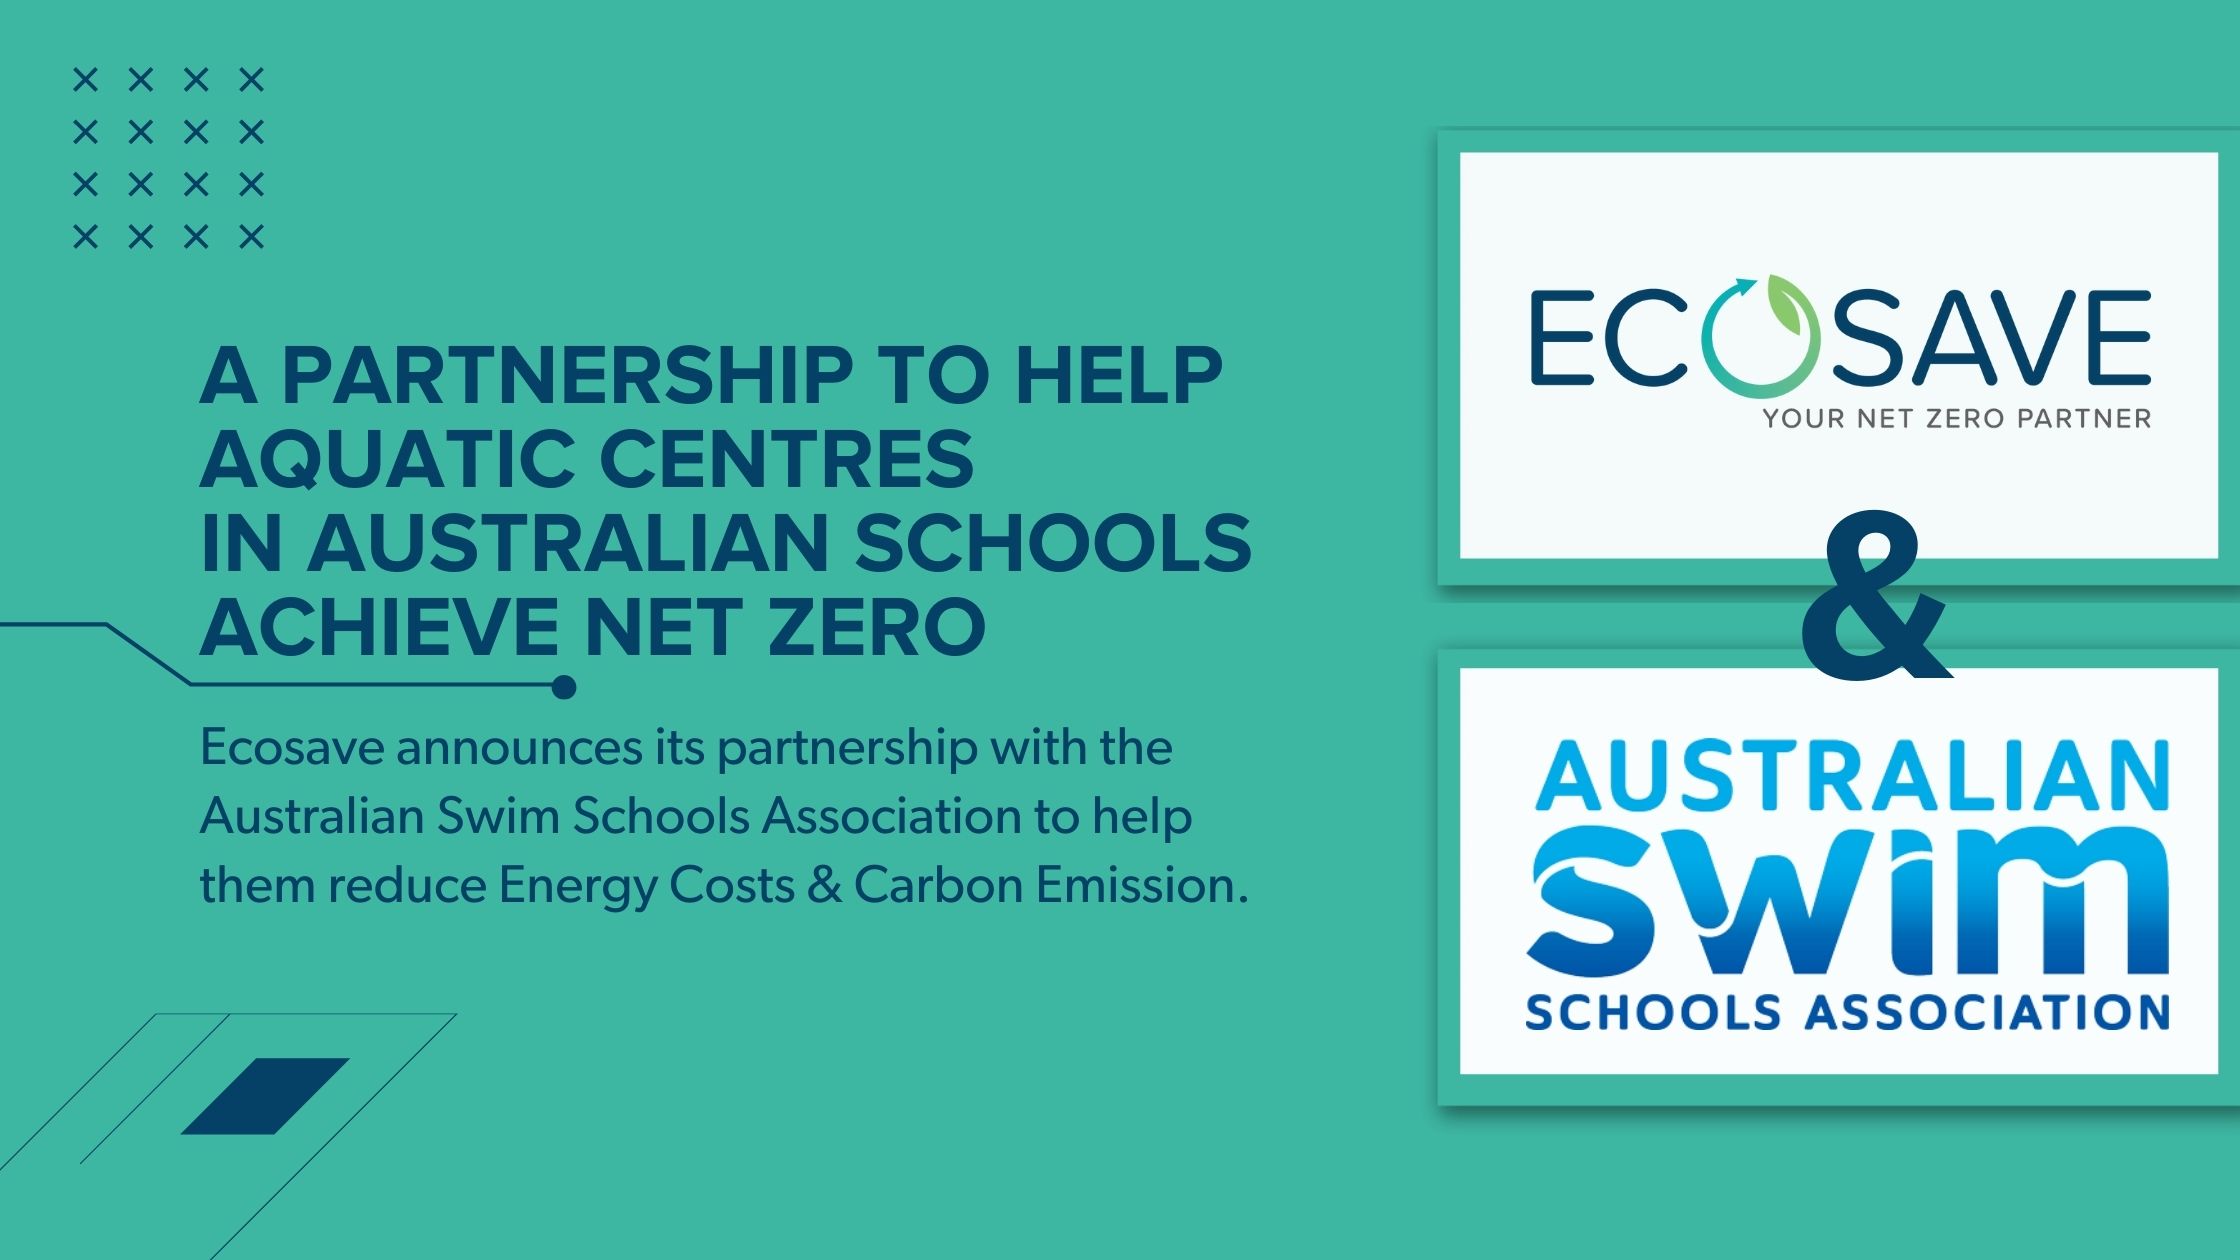 Ecosave & ASSA Partnership to Help Aquatic Centres with their Sustainability Goals